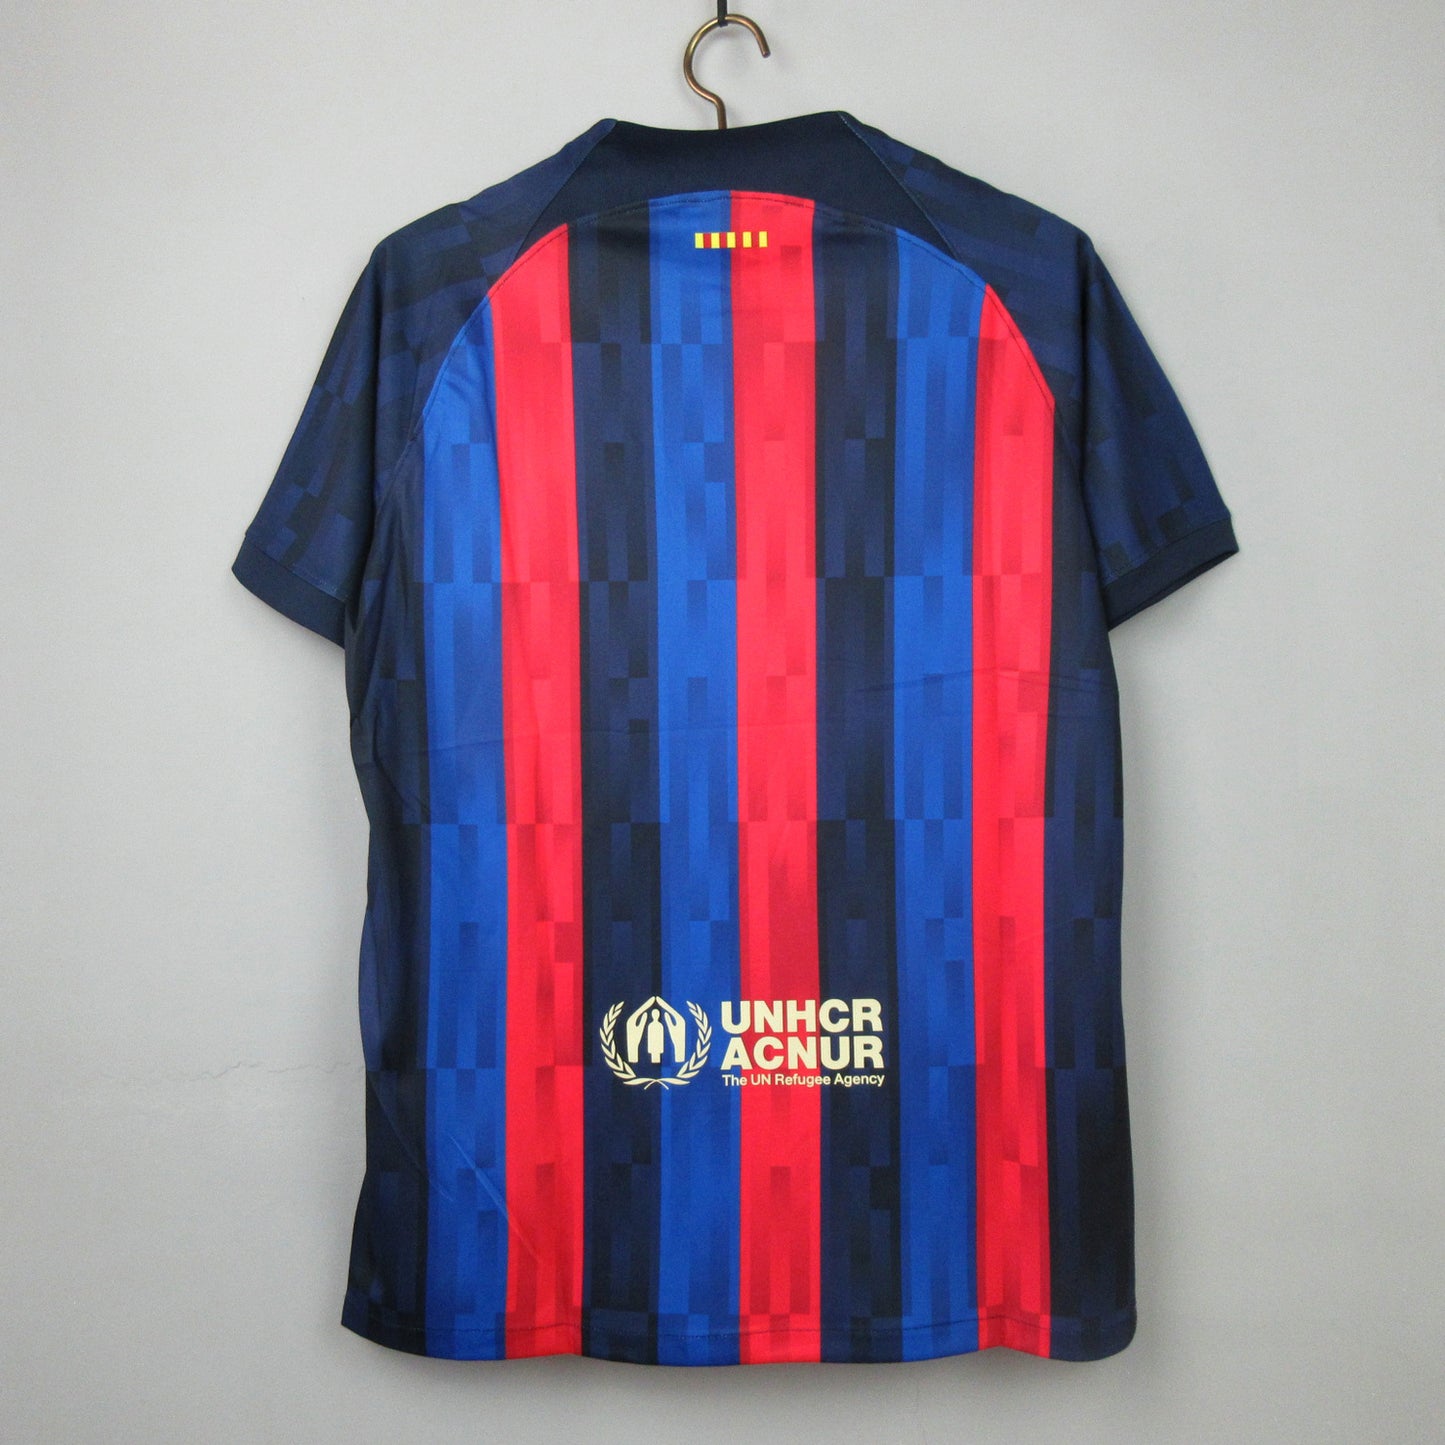 Barcelona 22/23 Home Jersey - Foot Jersey Now